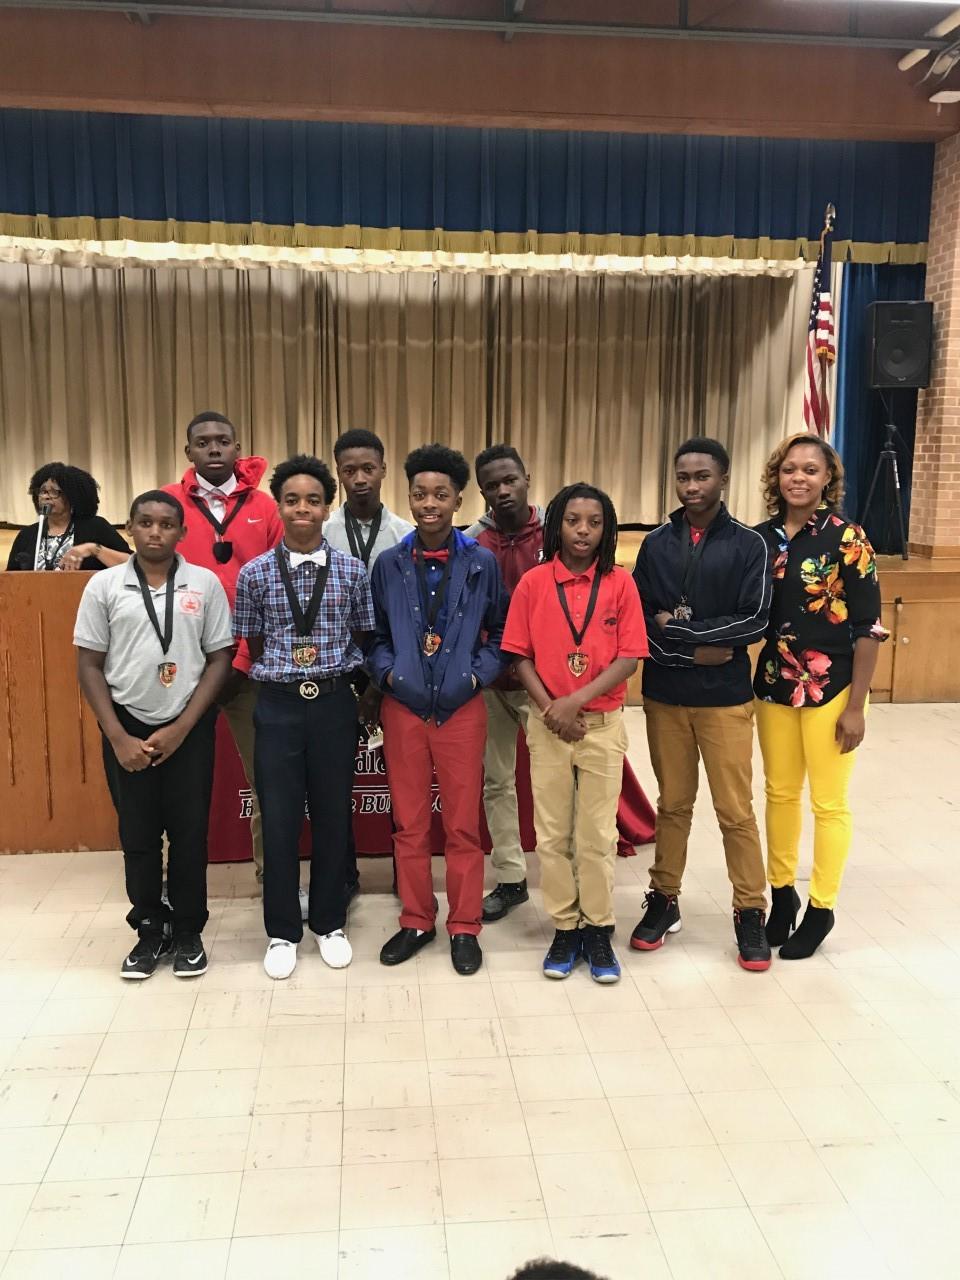 Baker Middle Student Athletes in group photo at the 2017 awards program